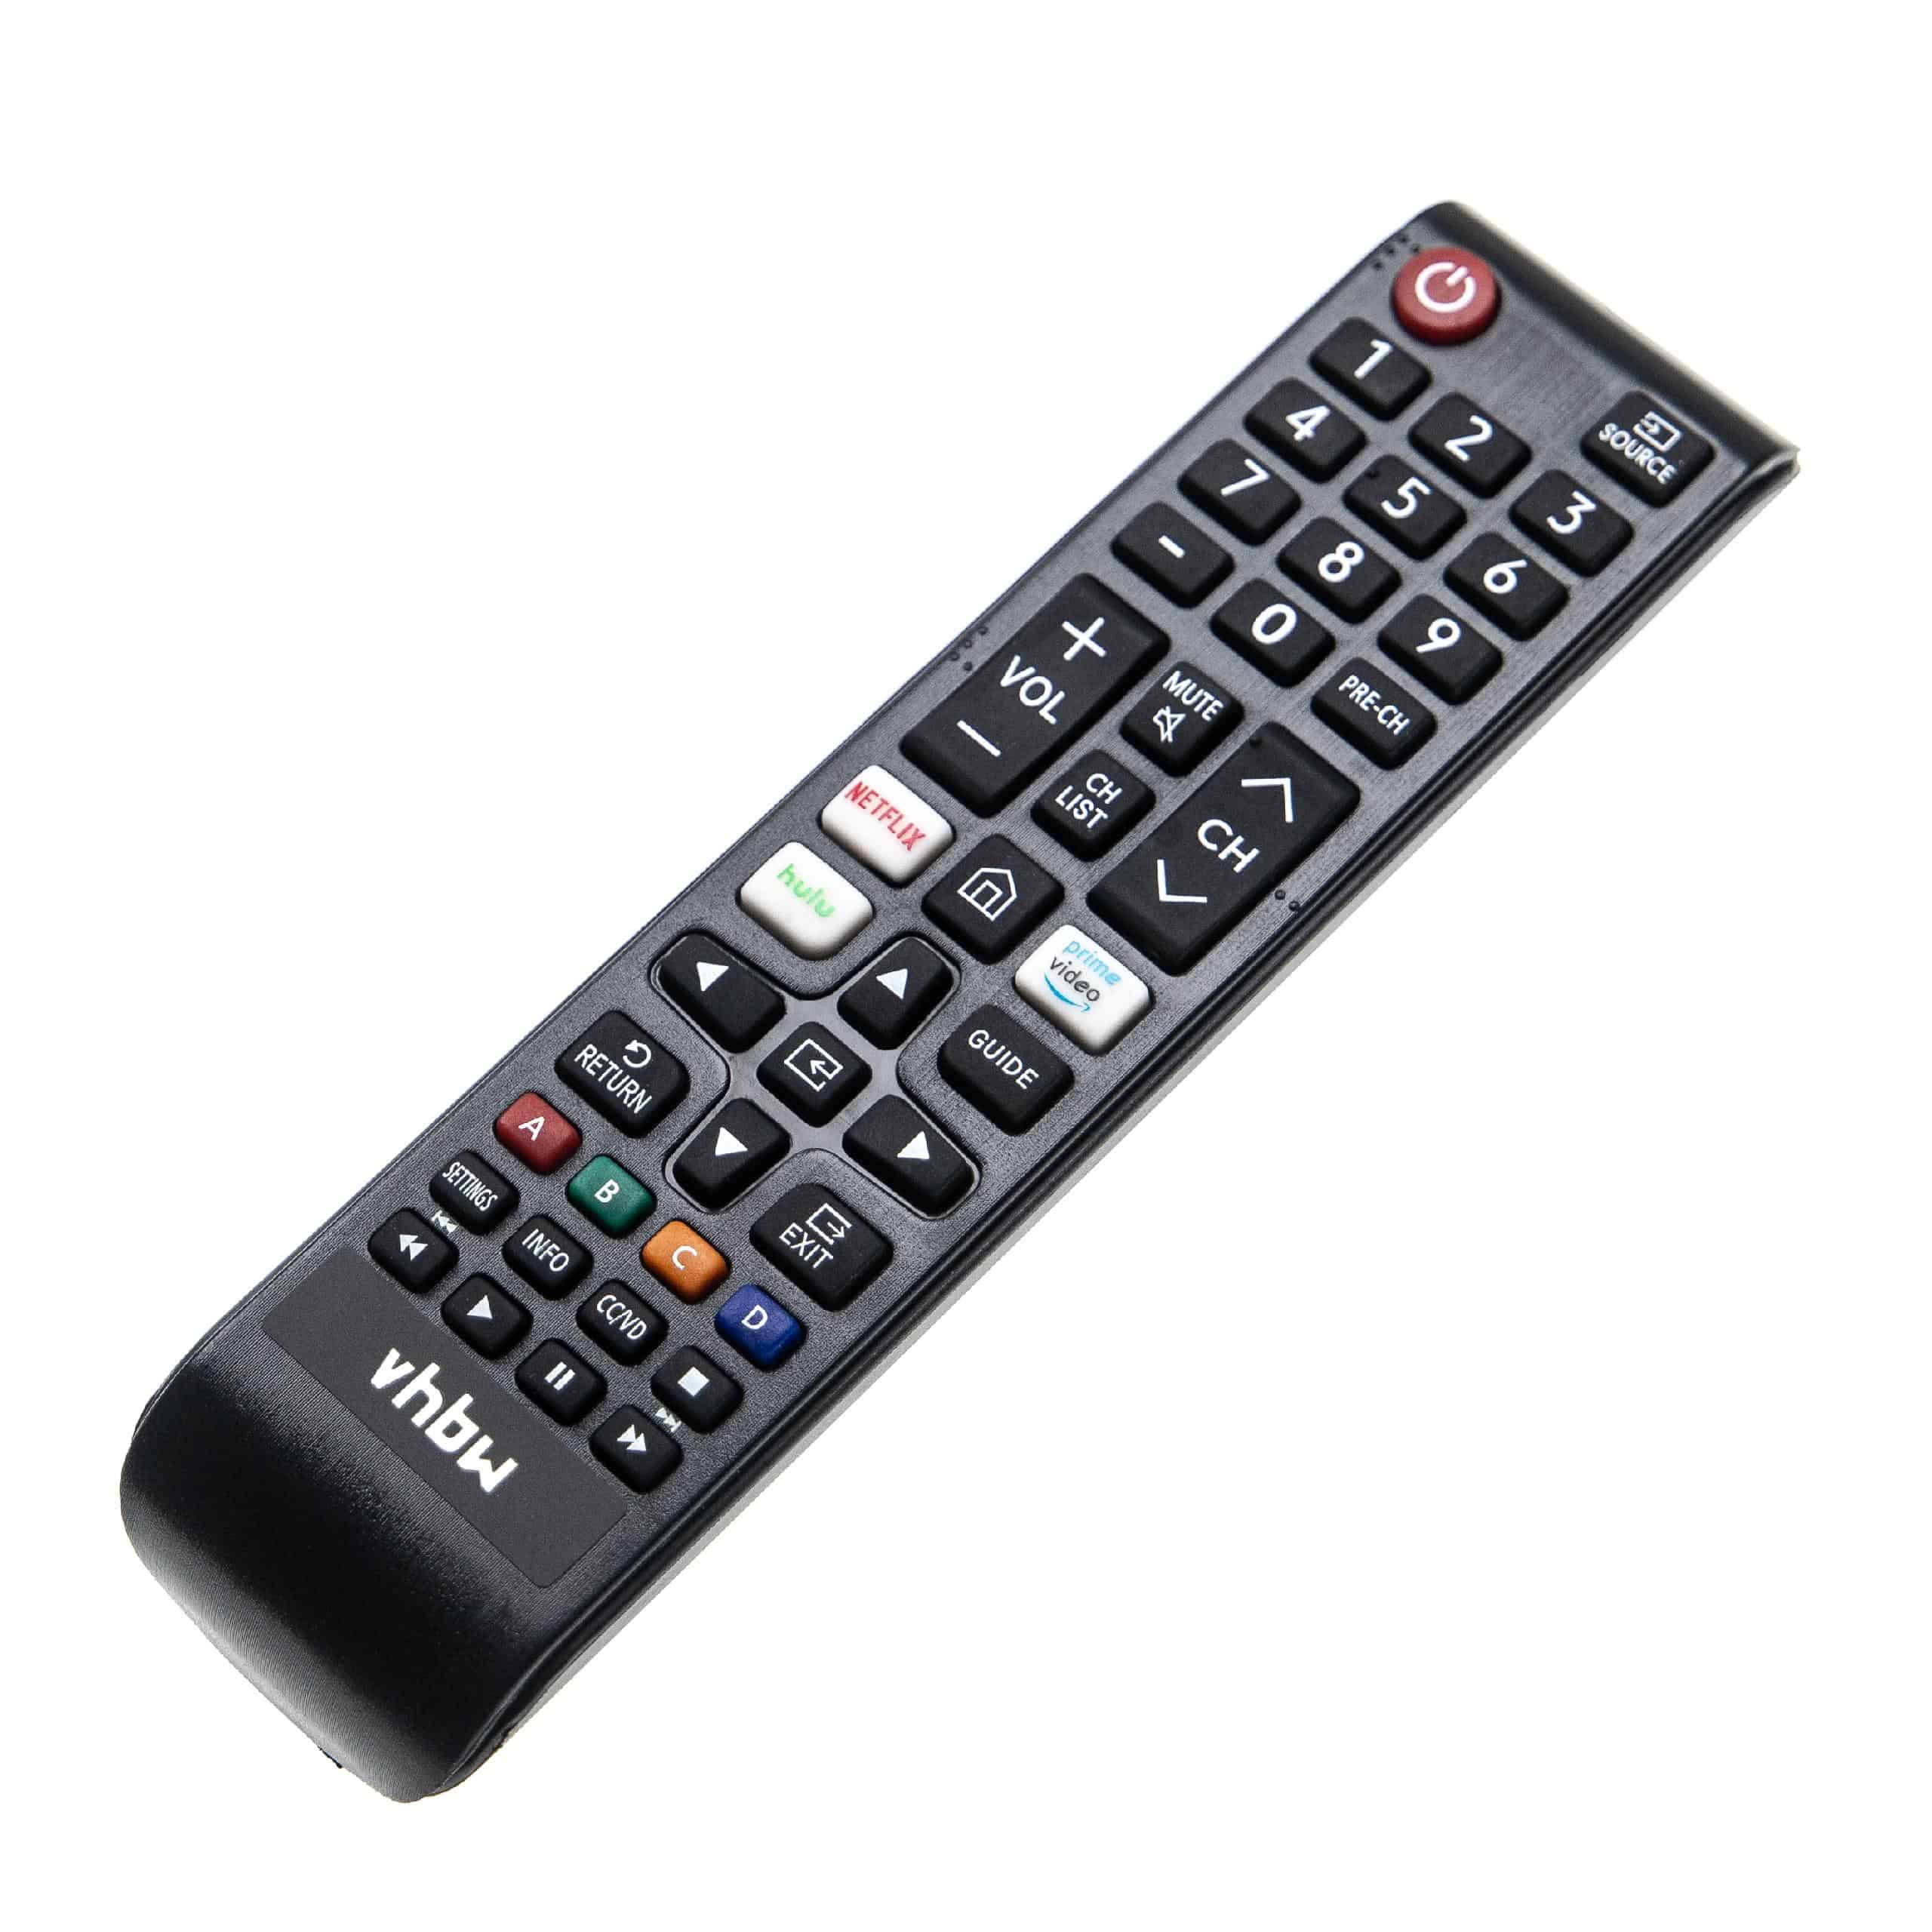 Remote Control replaces Samsung BN59-01315A for Samsung TV